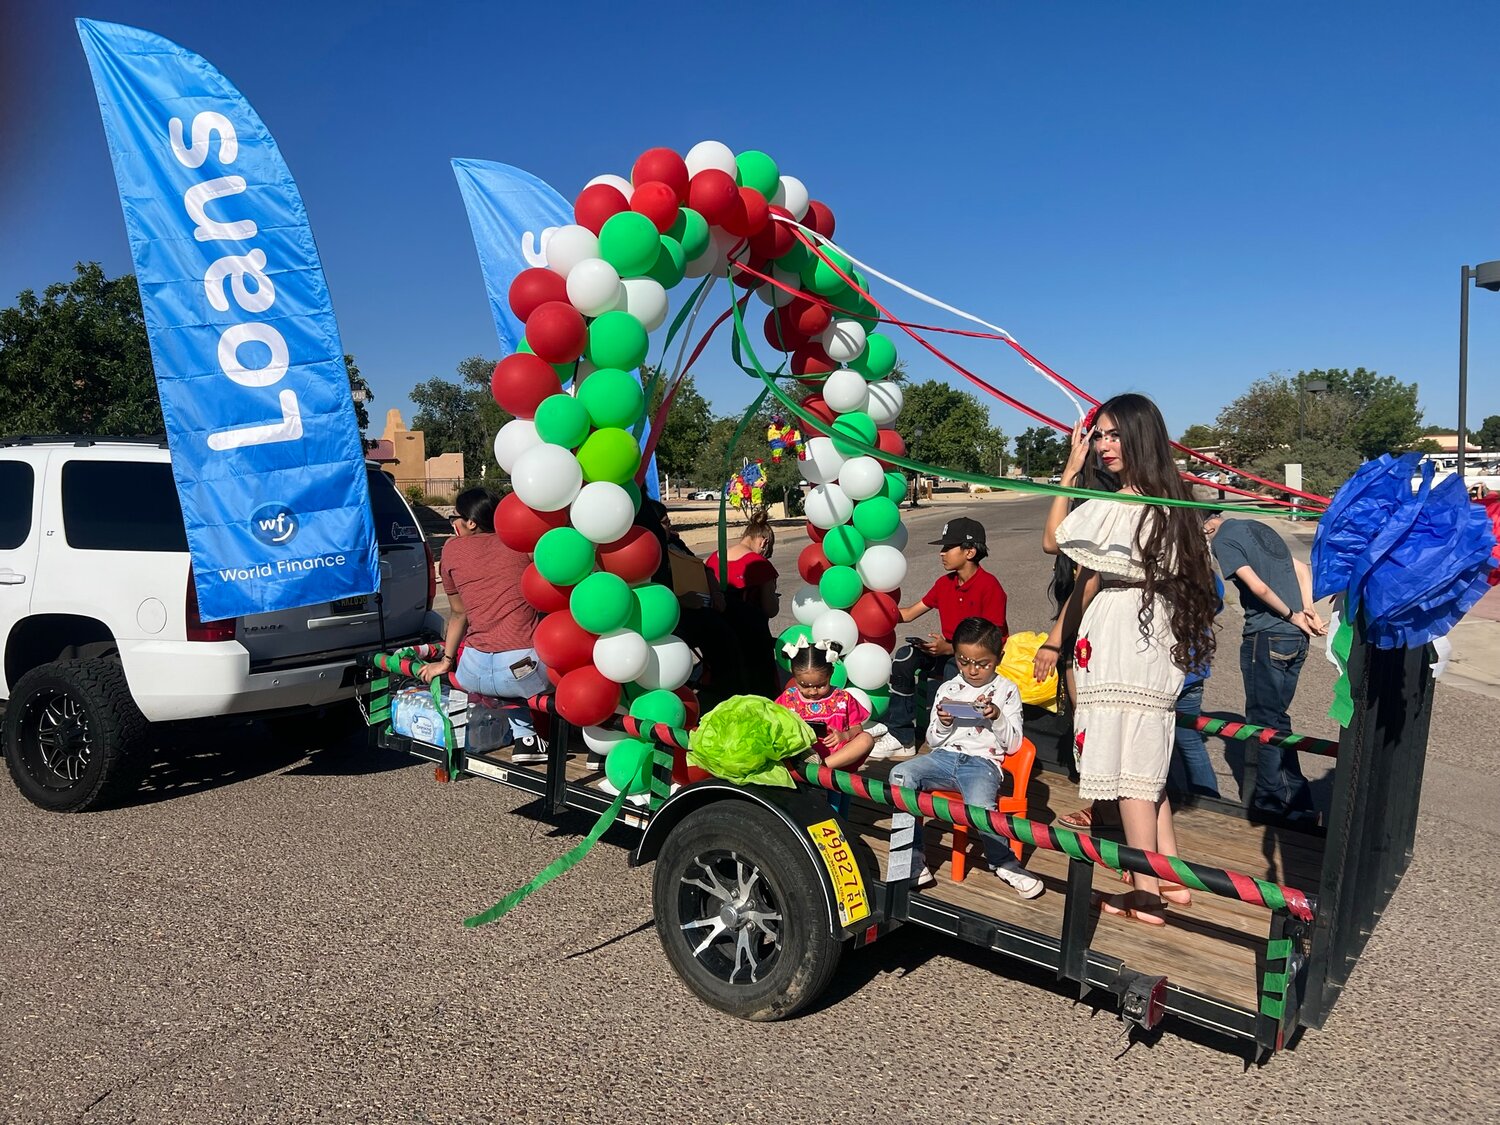 Celebrating Diez y Seis de Septembre, aka Mexican Independence Day, in Mesilla a parade prepares to make its way through the town on Saturday, Sept. 16. On the World Finance float, children and adults are ready to start well in advance of the event.